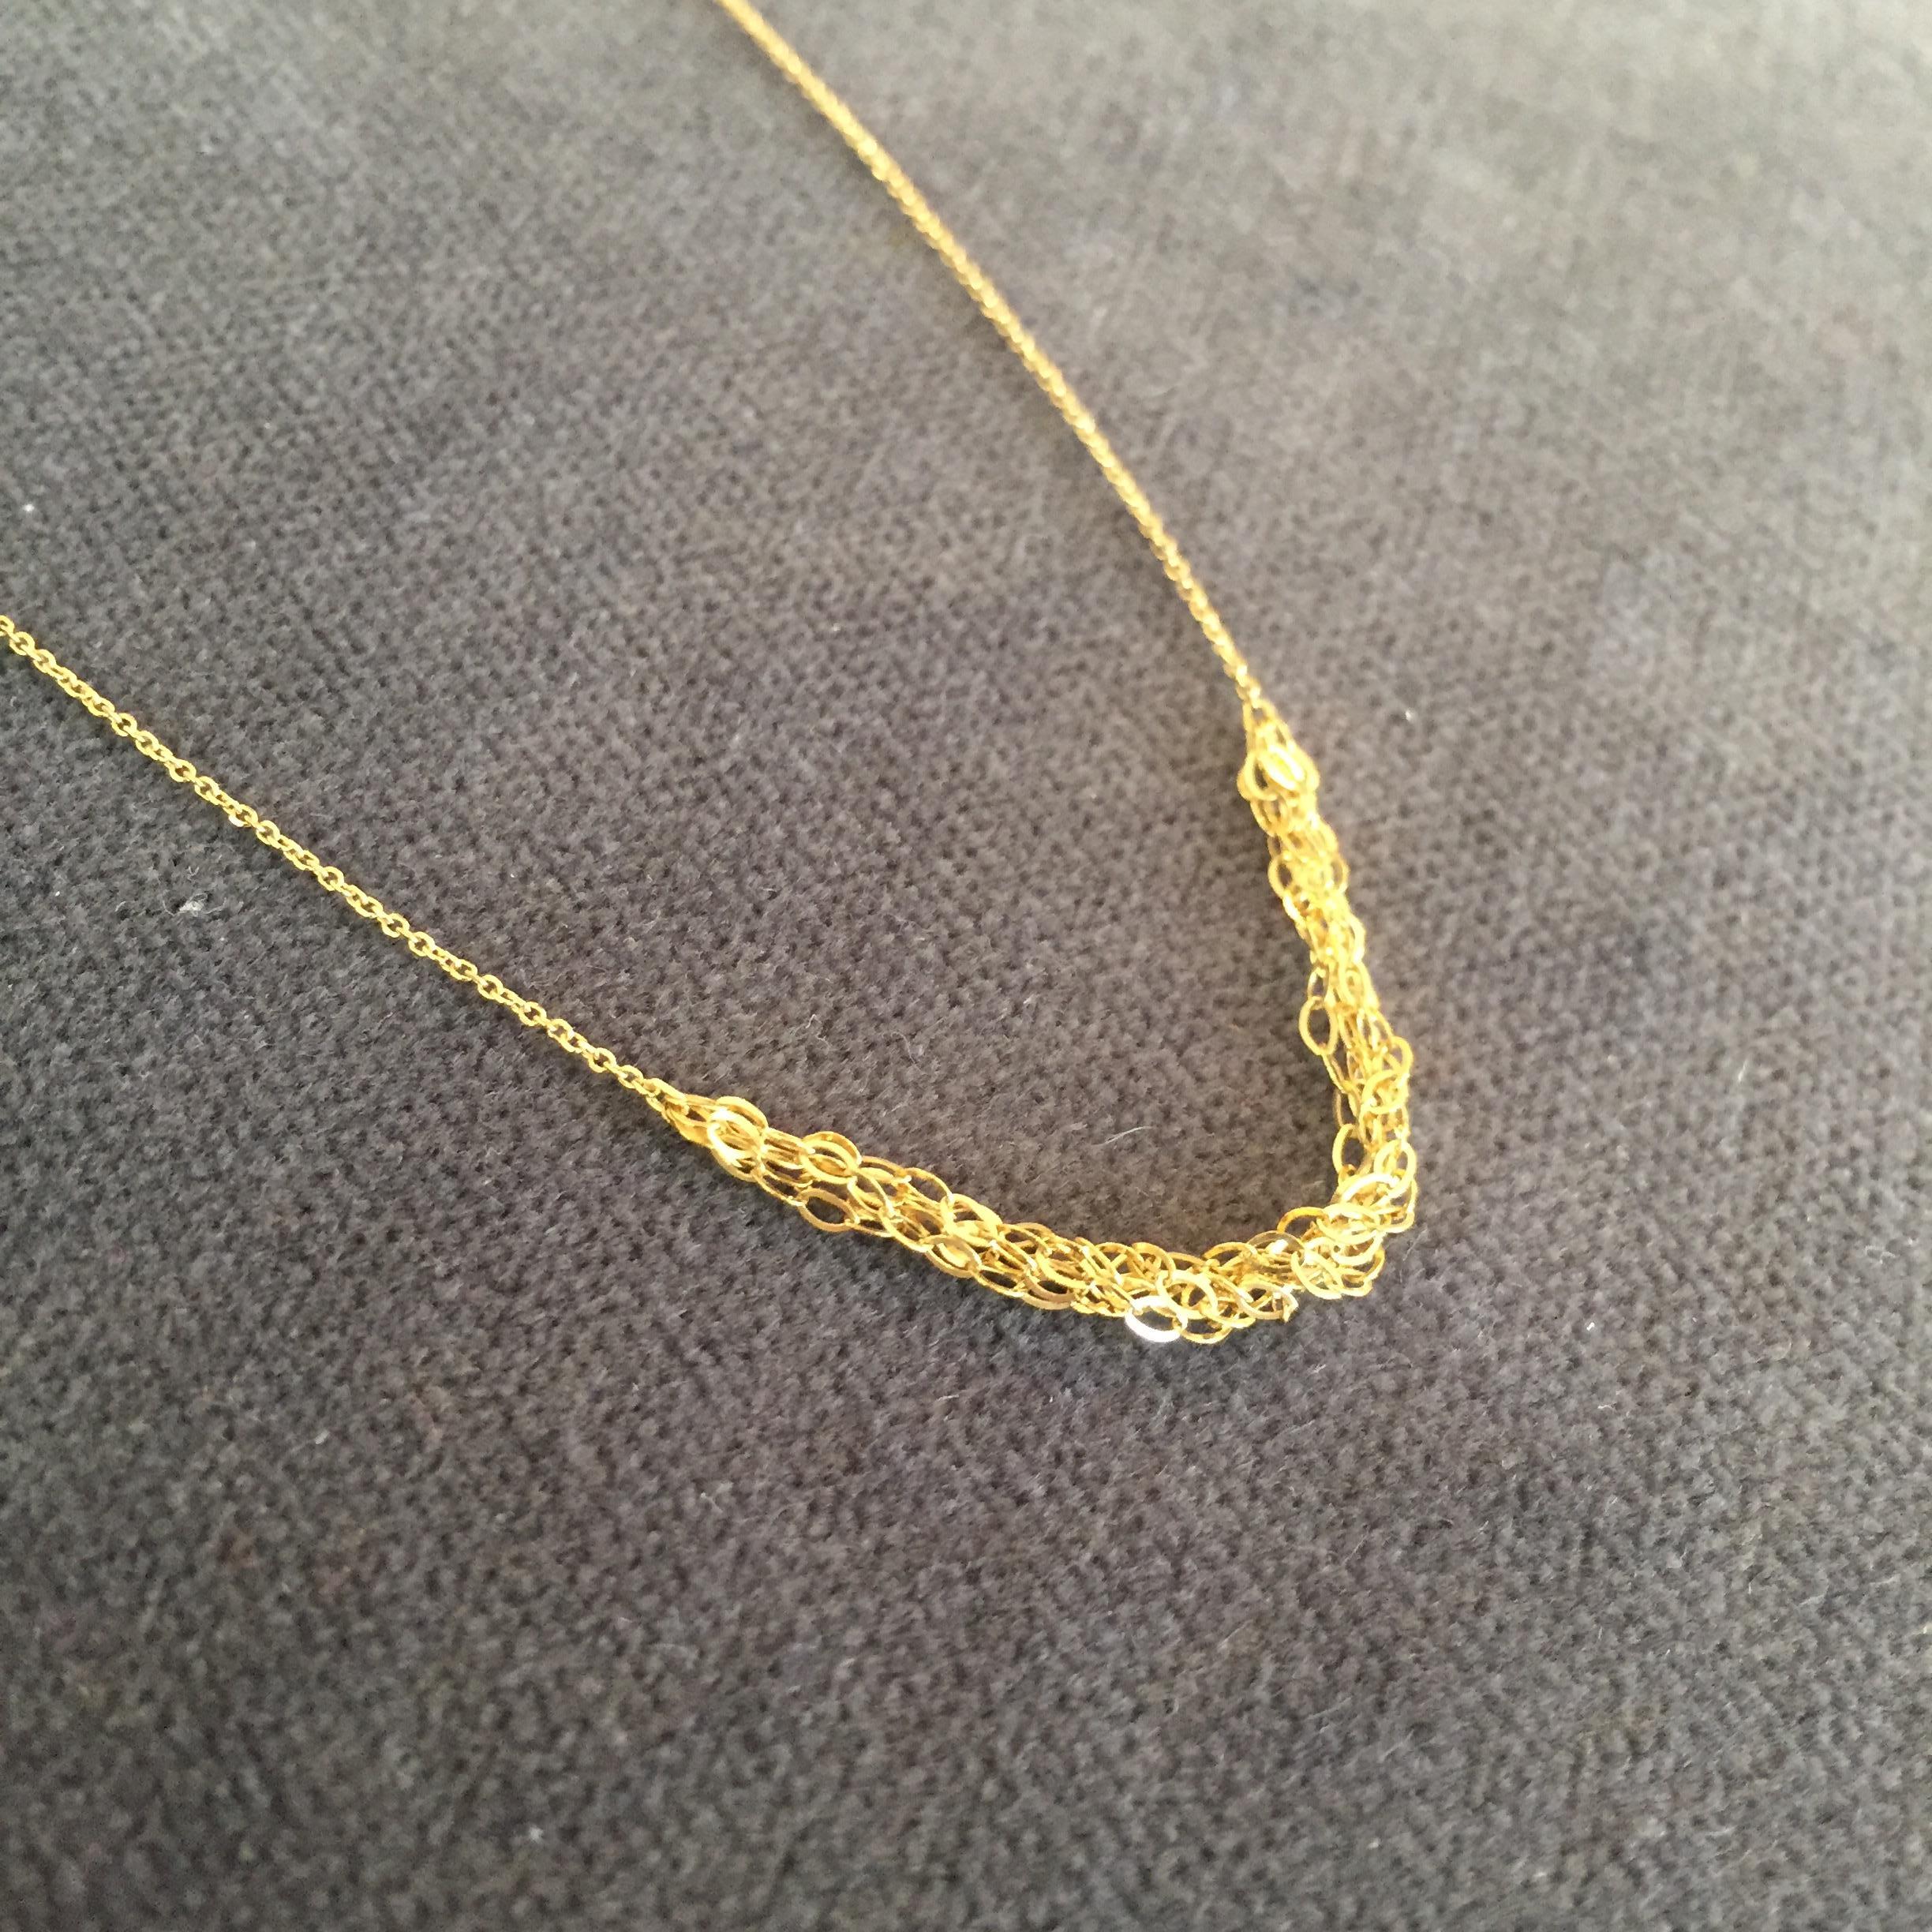 This 18k yellow gold necklace is made from delicate fine sparkling chain with a section of layered oval chains at the front. The overall length is 40cm. It makes a perfect everyday necklace and has quickly become a Sweet Pea classic.